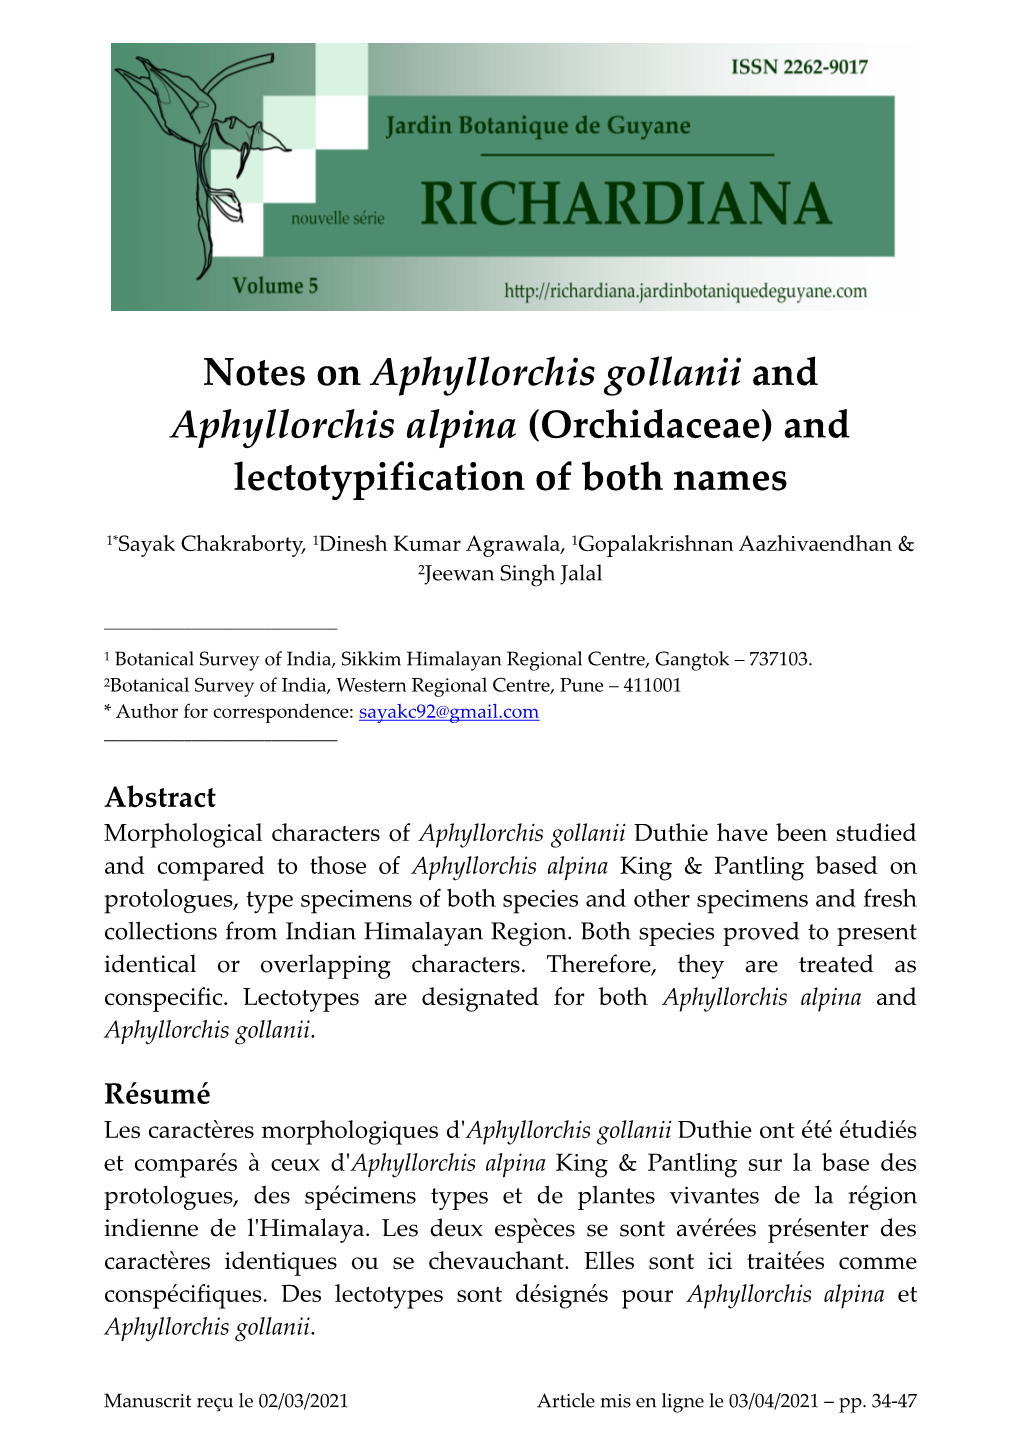 Notes on Aphyllorchis Gollanii and Aphyllorchis Alpina (Orchidaceae) and Lectotypification of Both Names